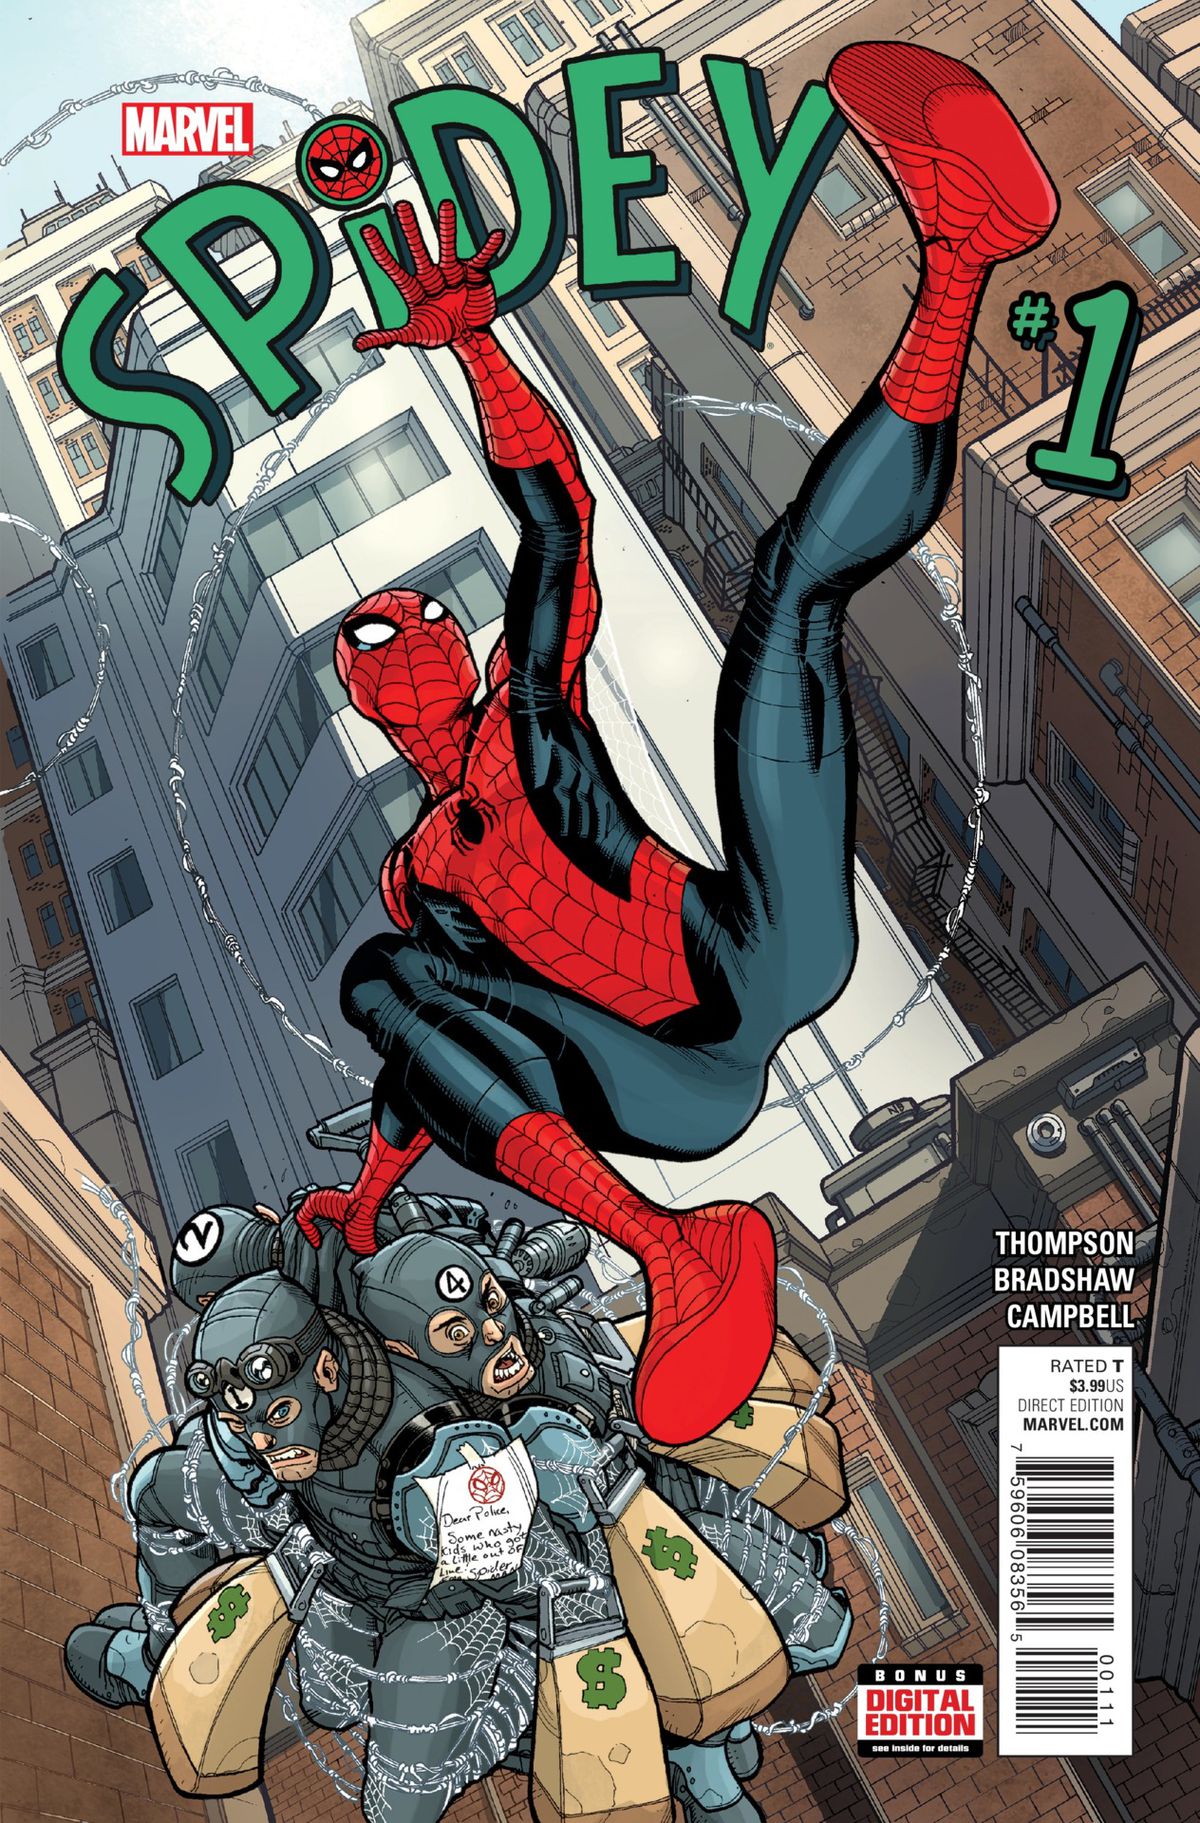 Spider-Man swings through New York City carrying four defeated bank robbers on the cover of Spidey #1, Marvel Comics (2015). 